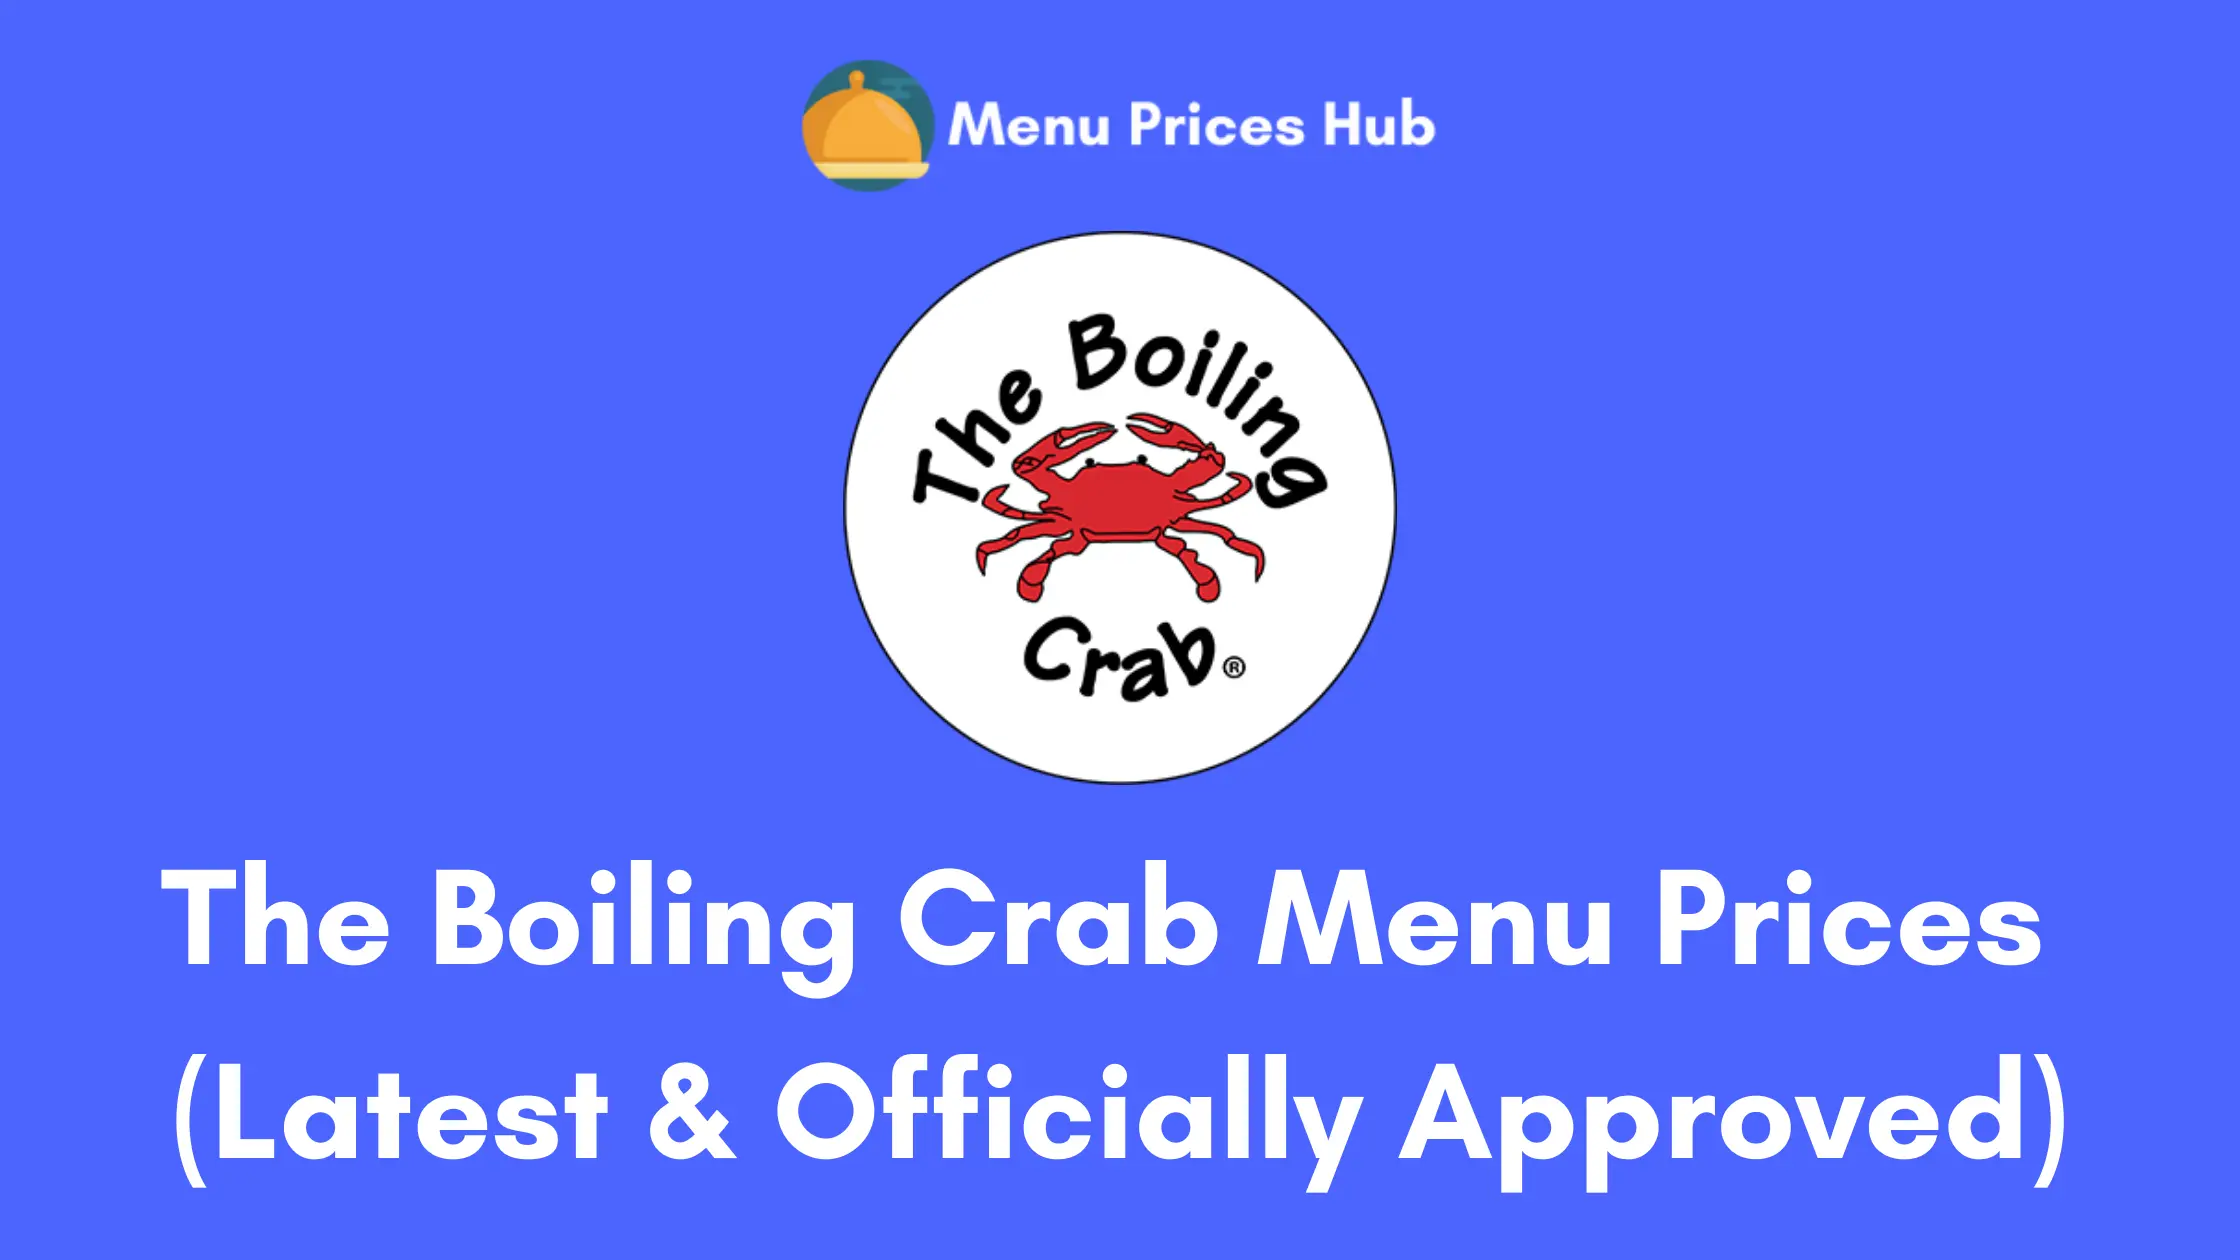 The Boiling Crab Menu Prices